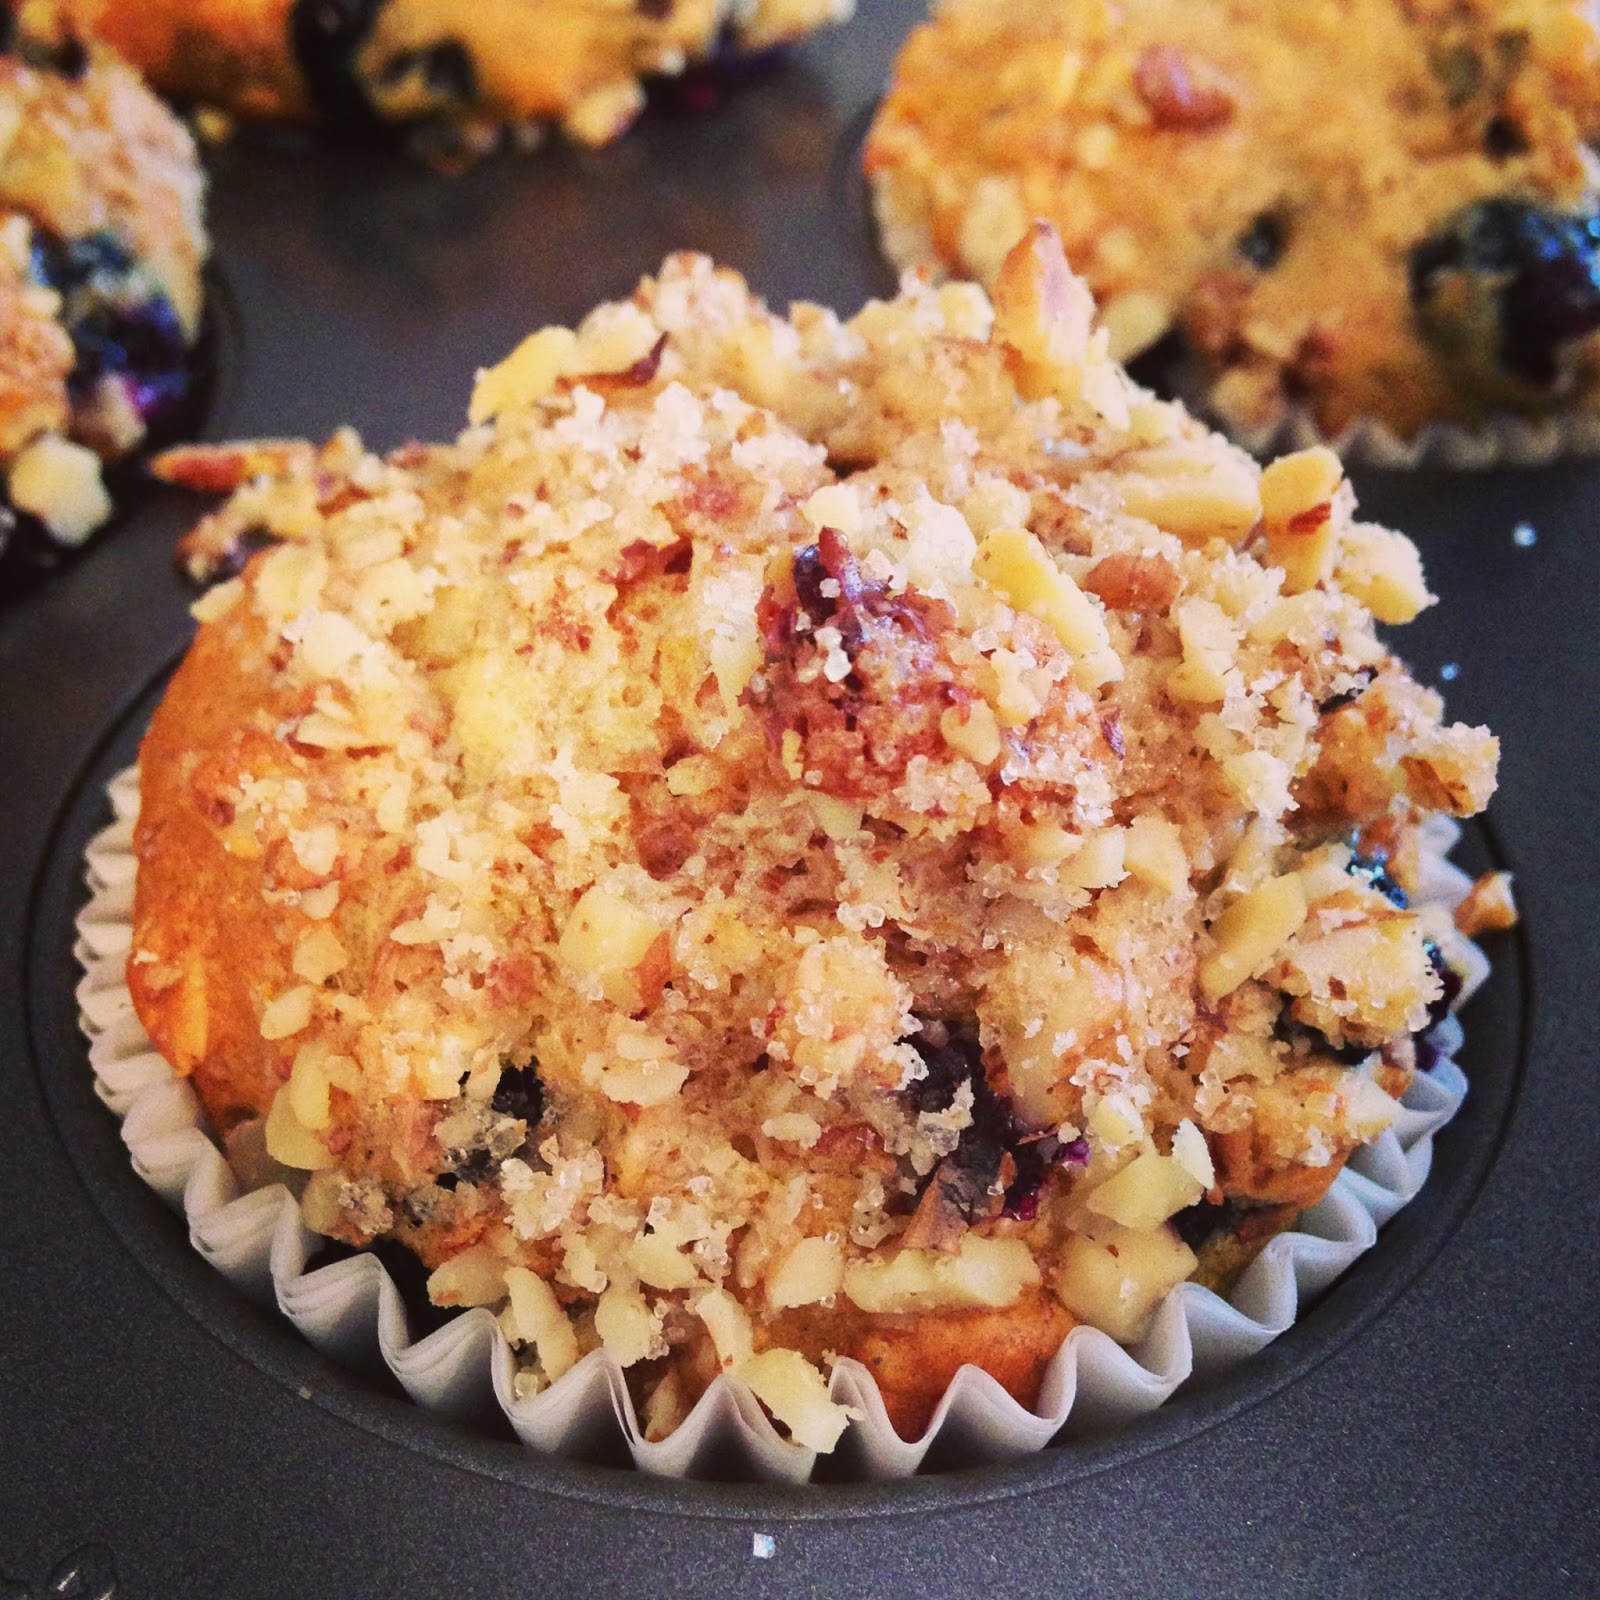 Cultural Cooking: Healthy Blueberry Oat Muffin Surprise!!